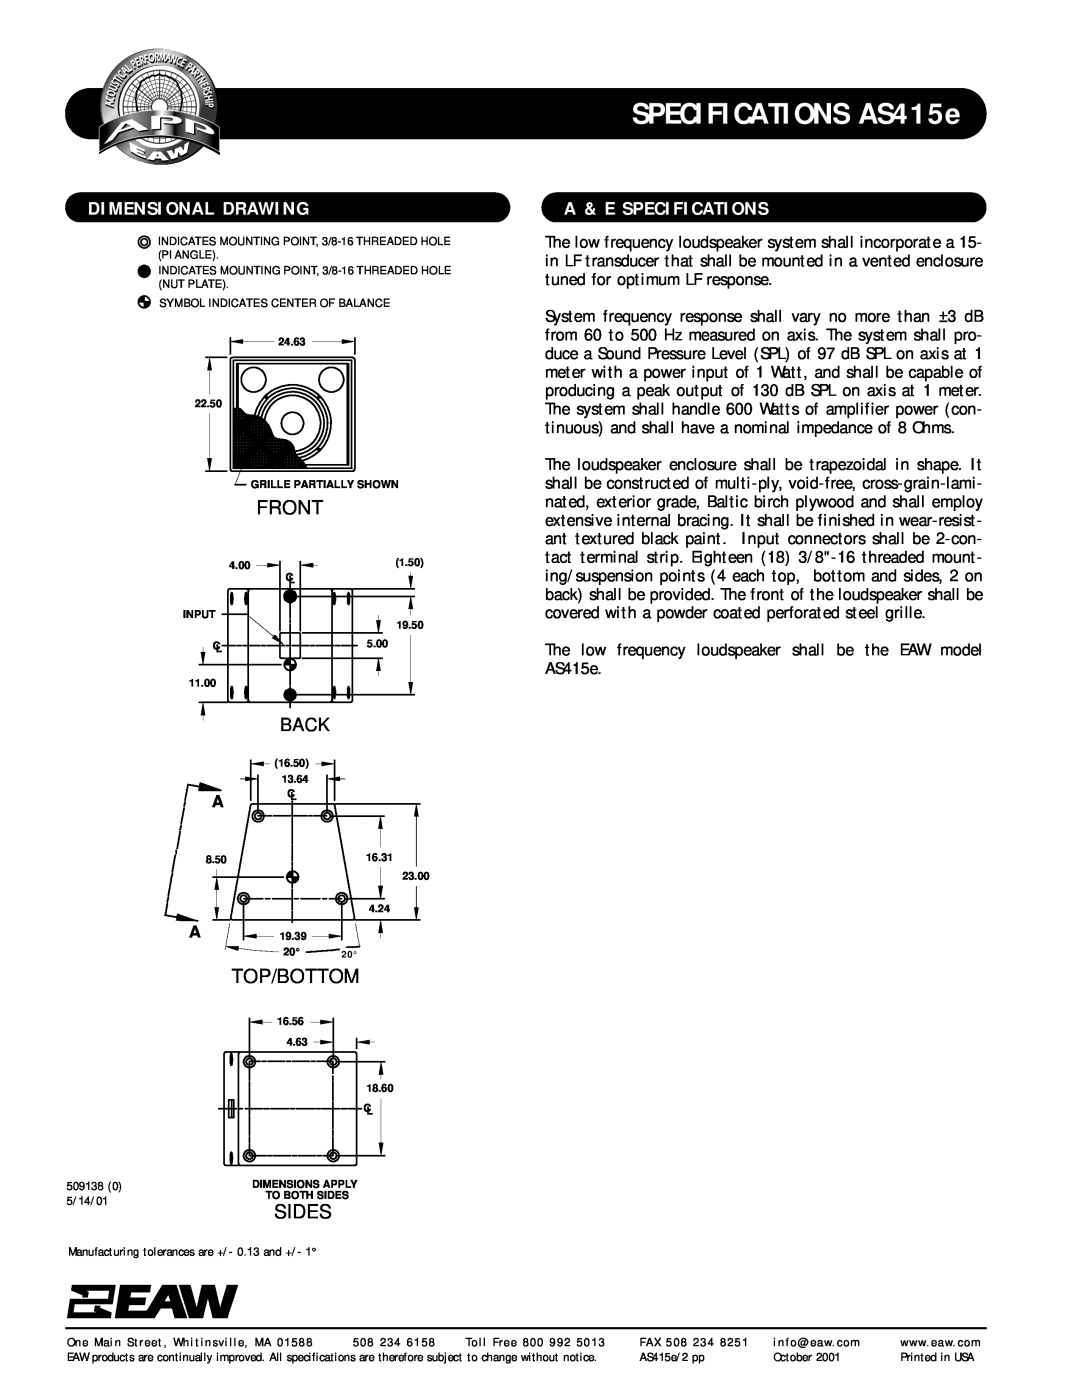 EAW specifications Dimensional Drawing, A & E Specifications, SPECIFICATIONS AS415e, Front 